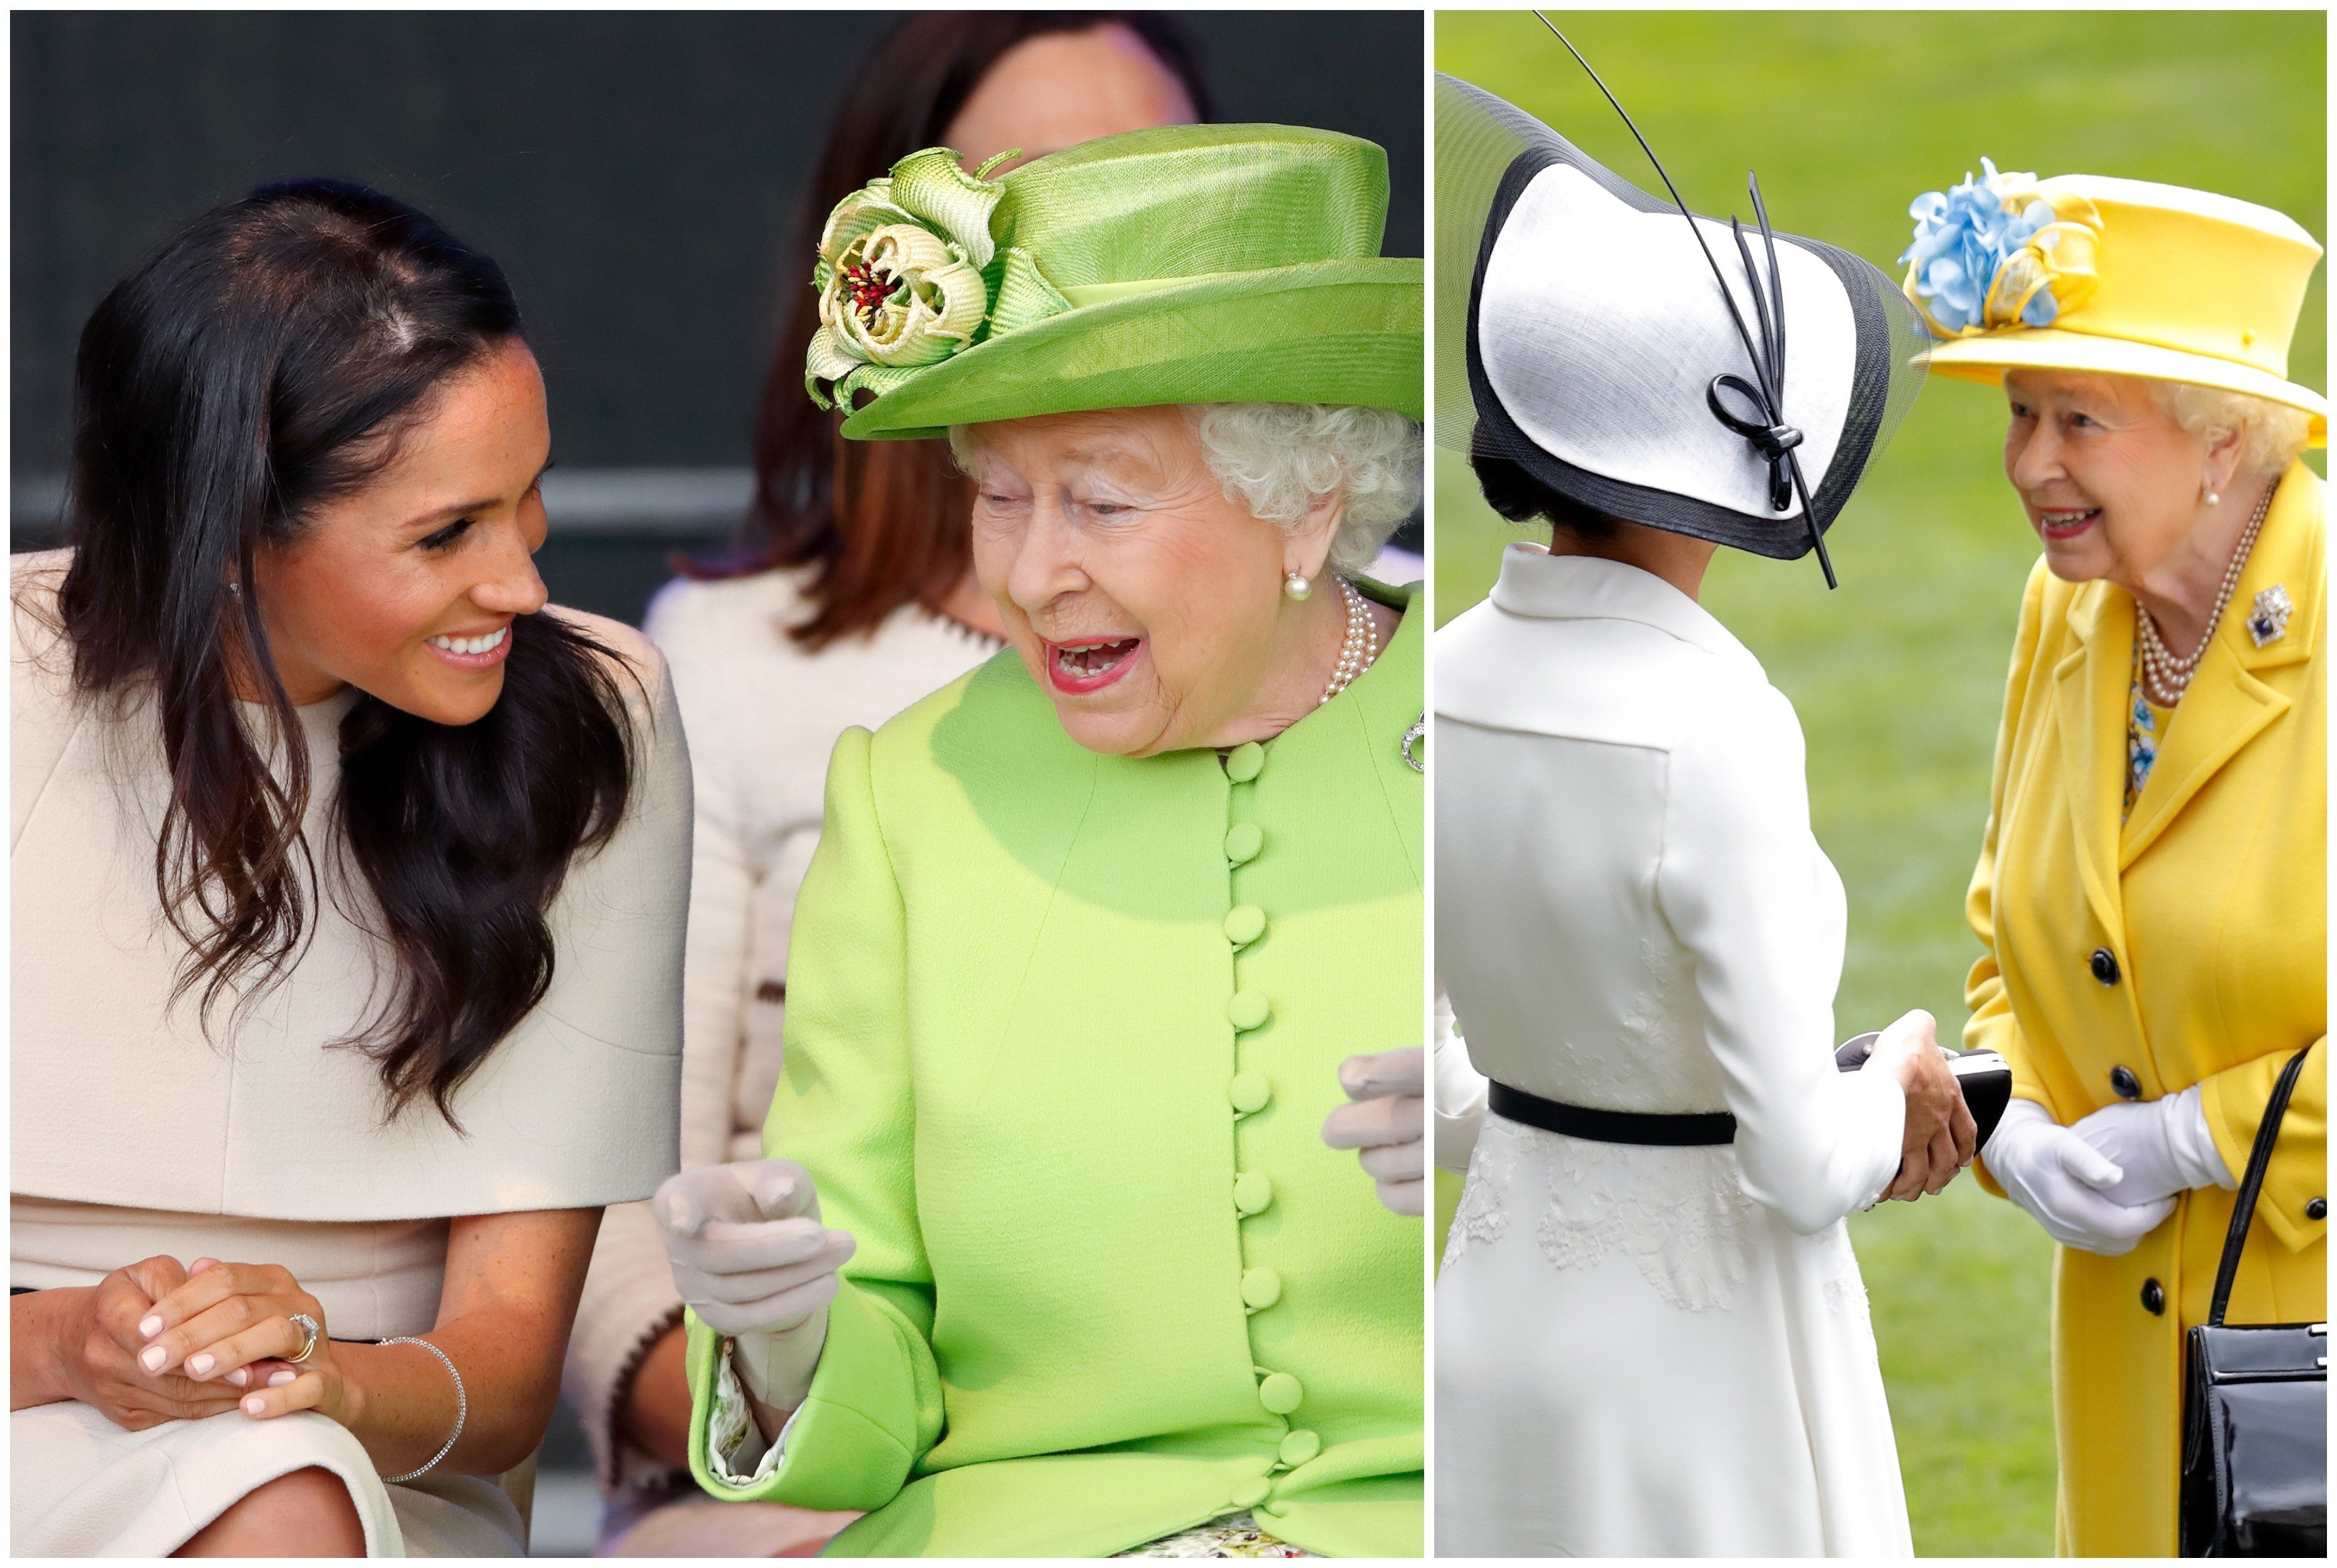 If you think Meghan Markle and Queen Elizabeth never got on, then take a look back at all these happy royal family pics from days of recent past. Photo: Getty